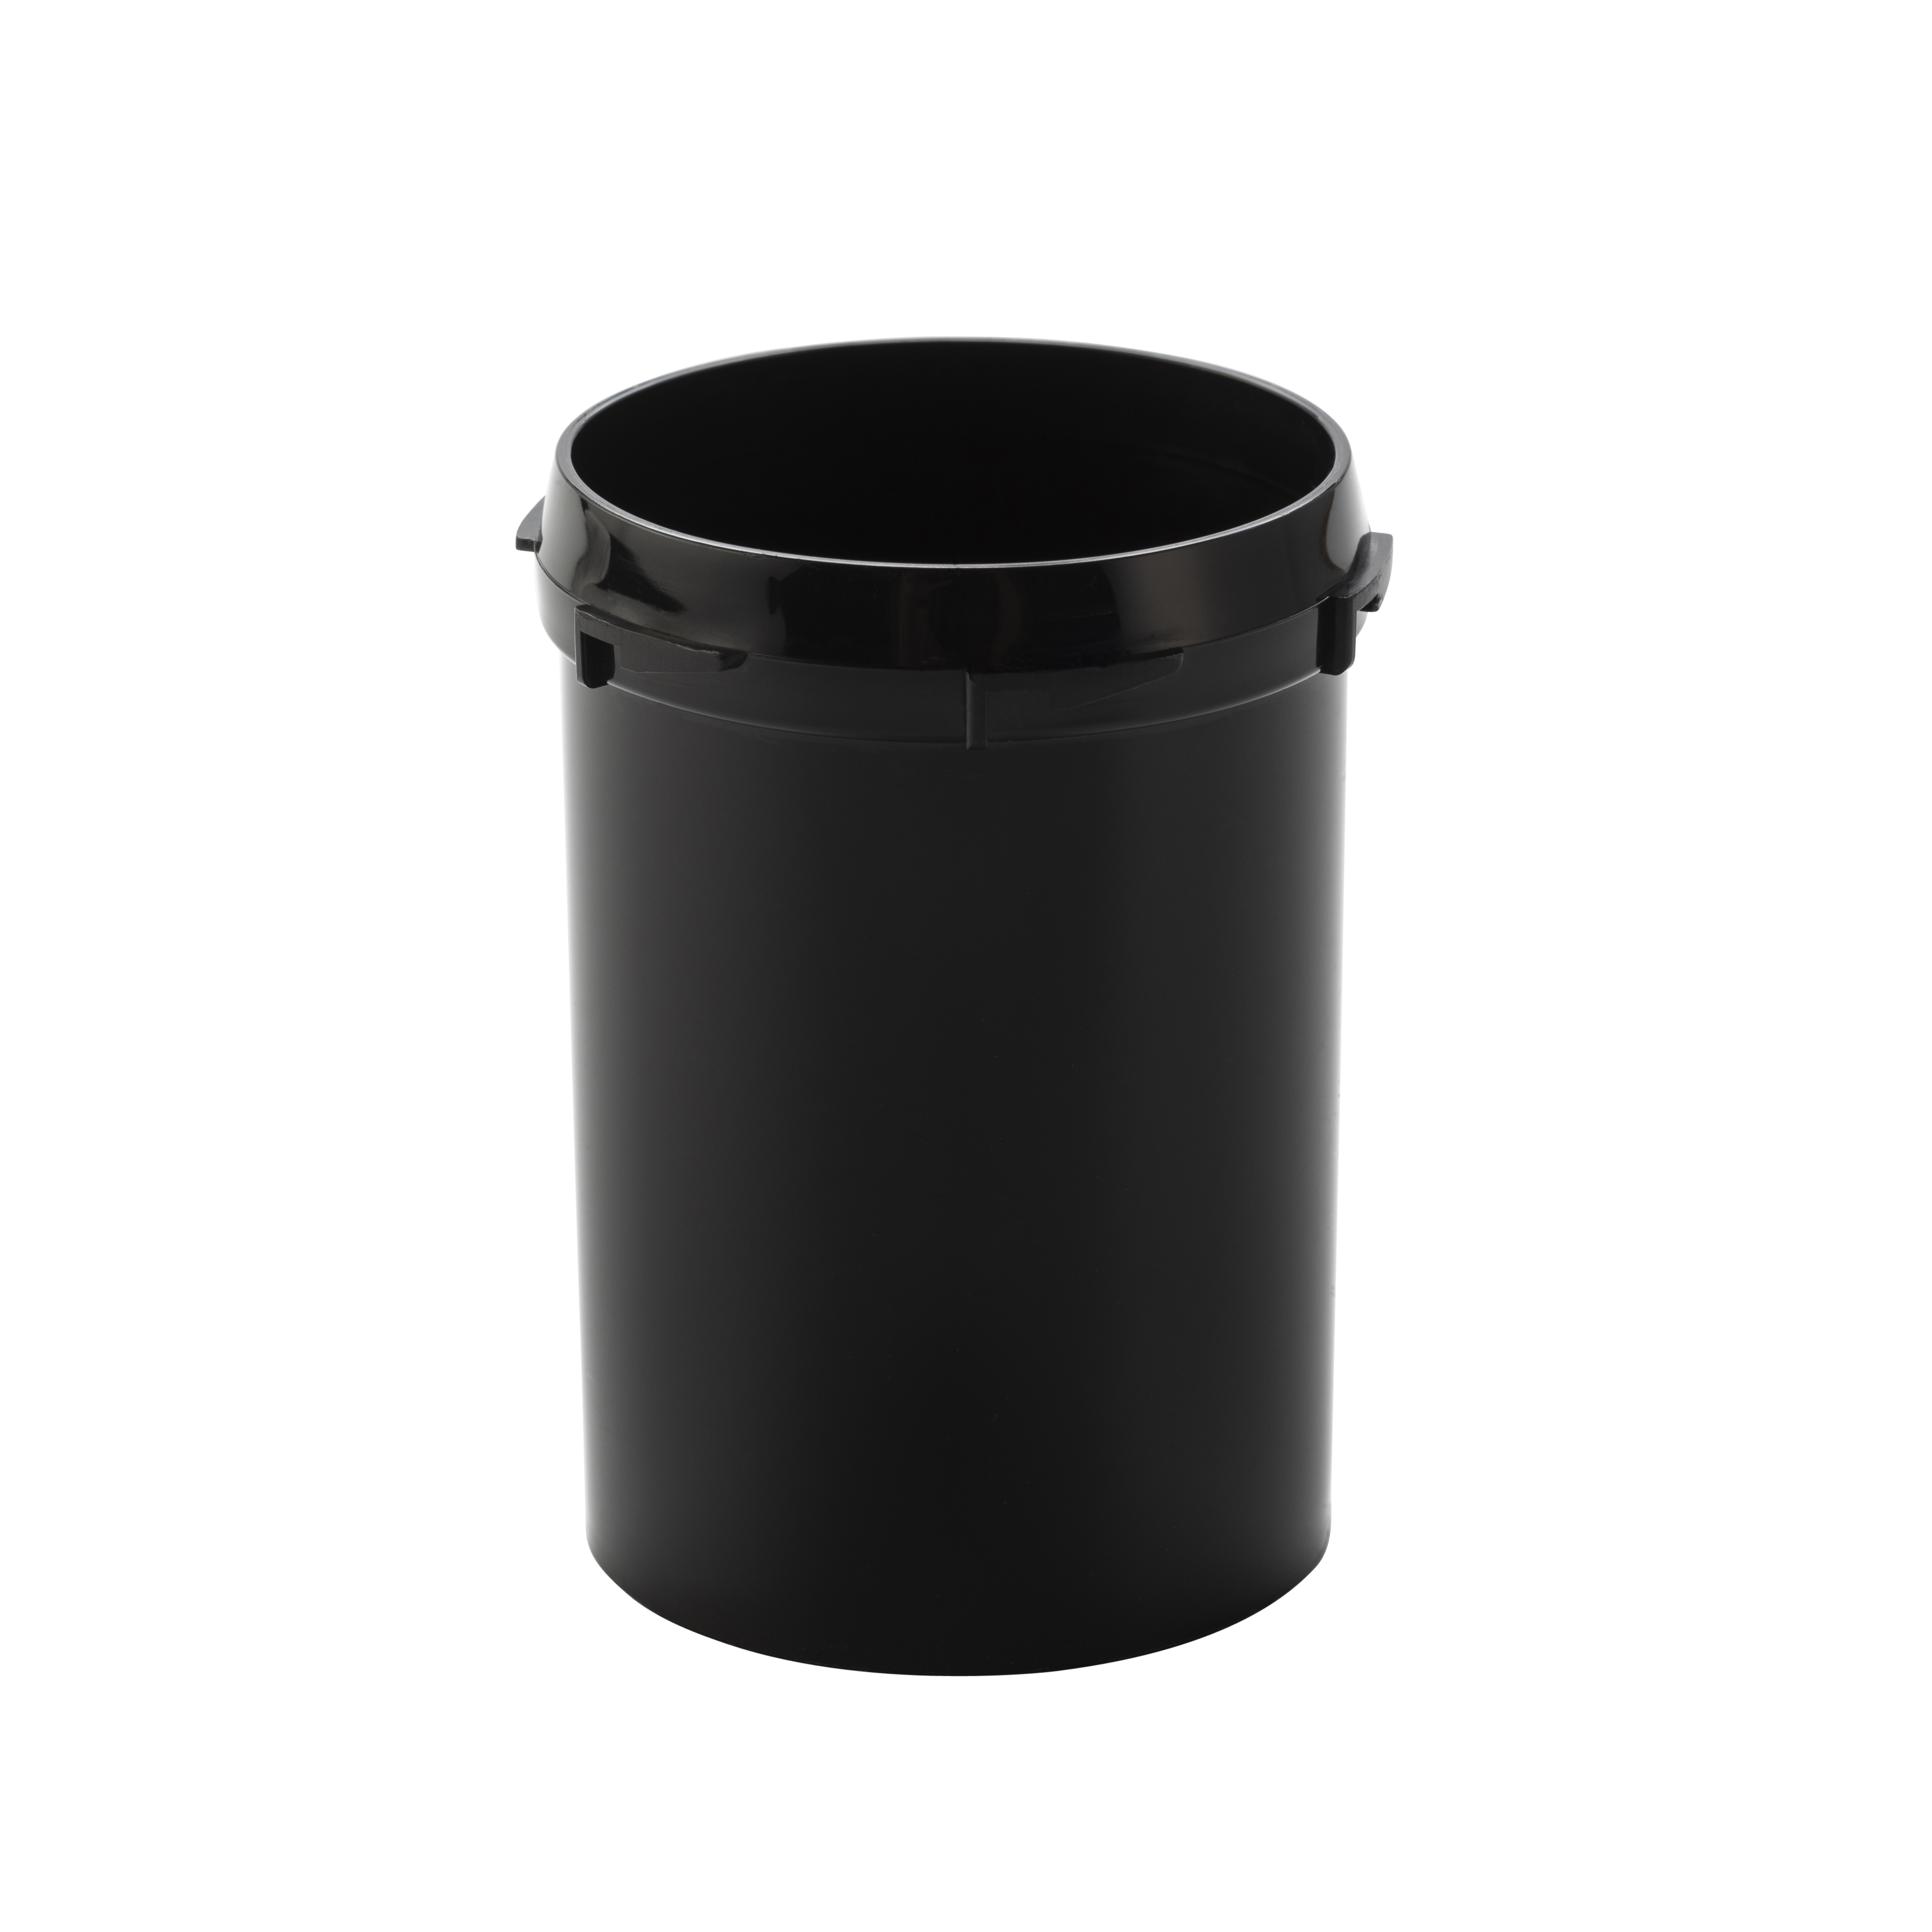 Black container with no lid